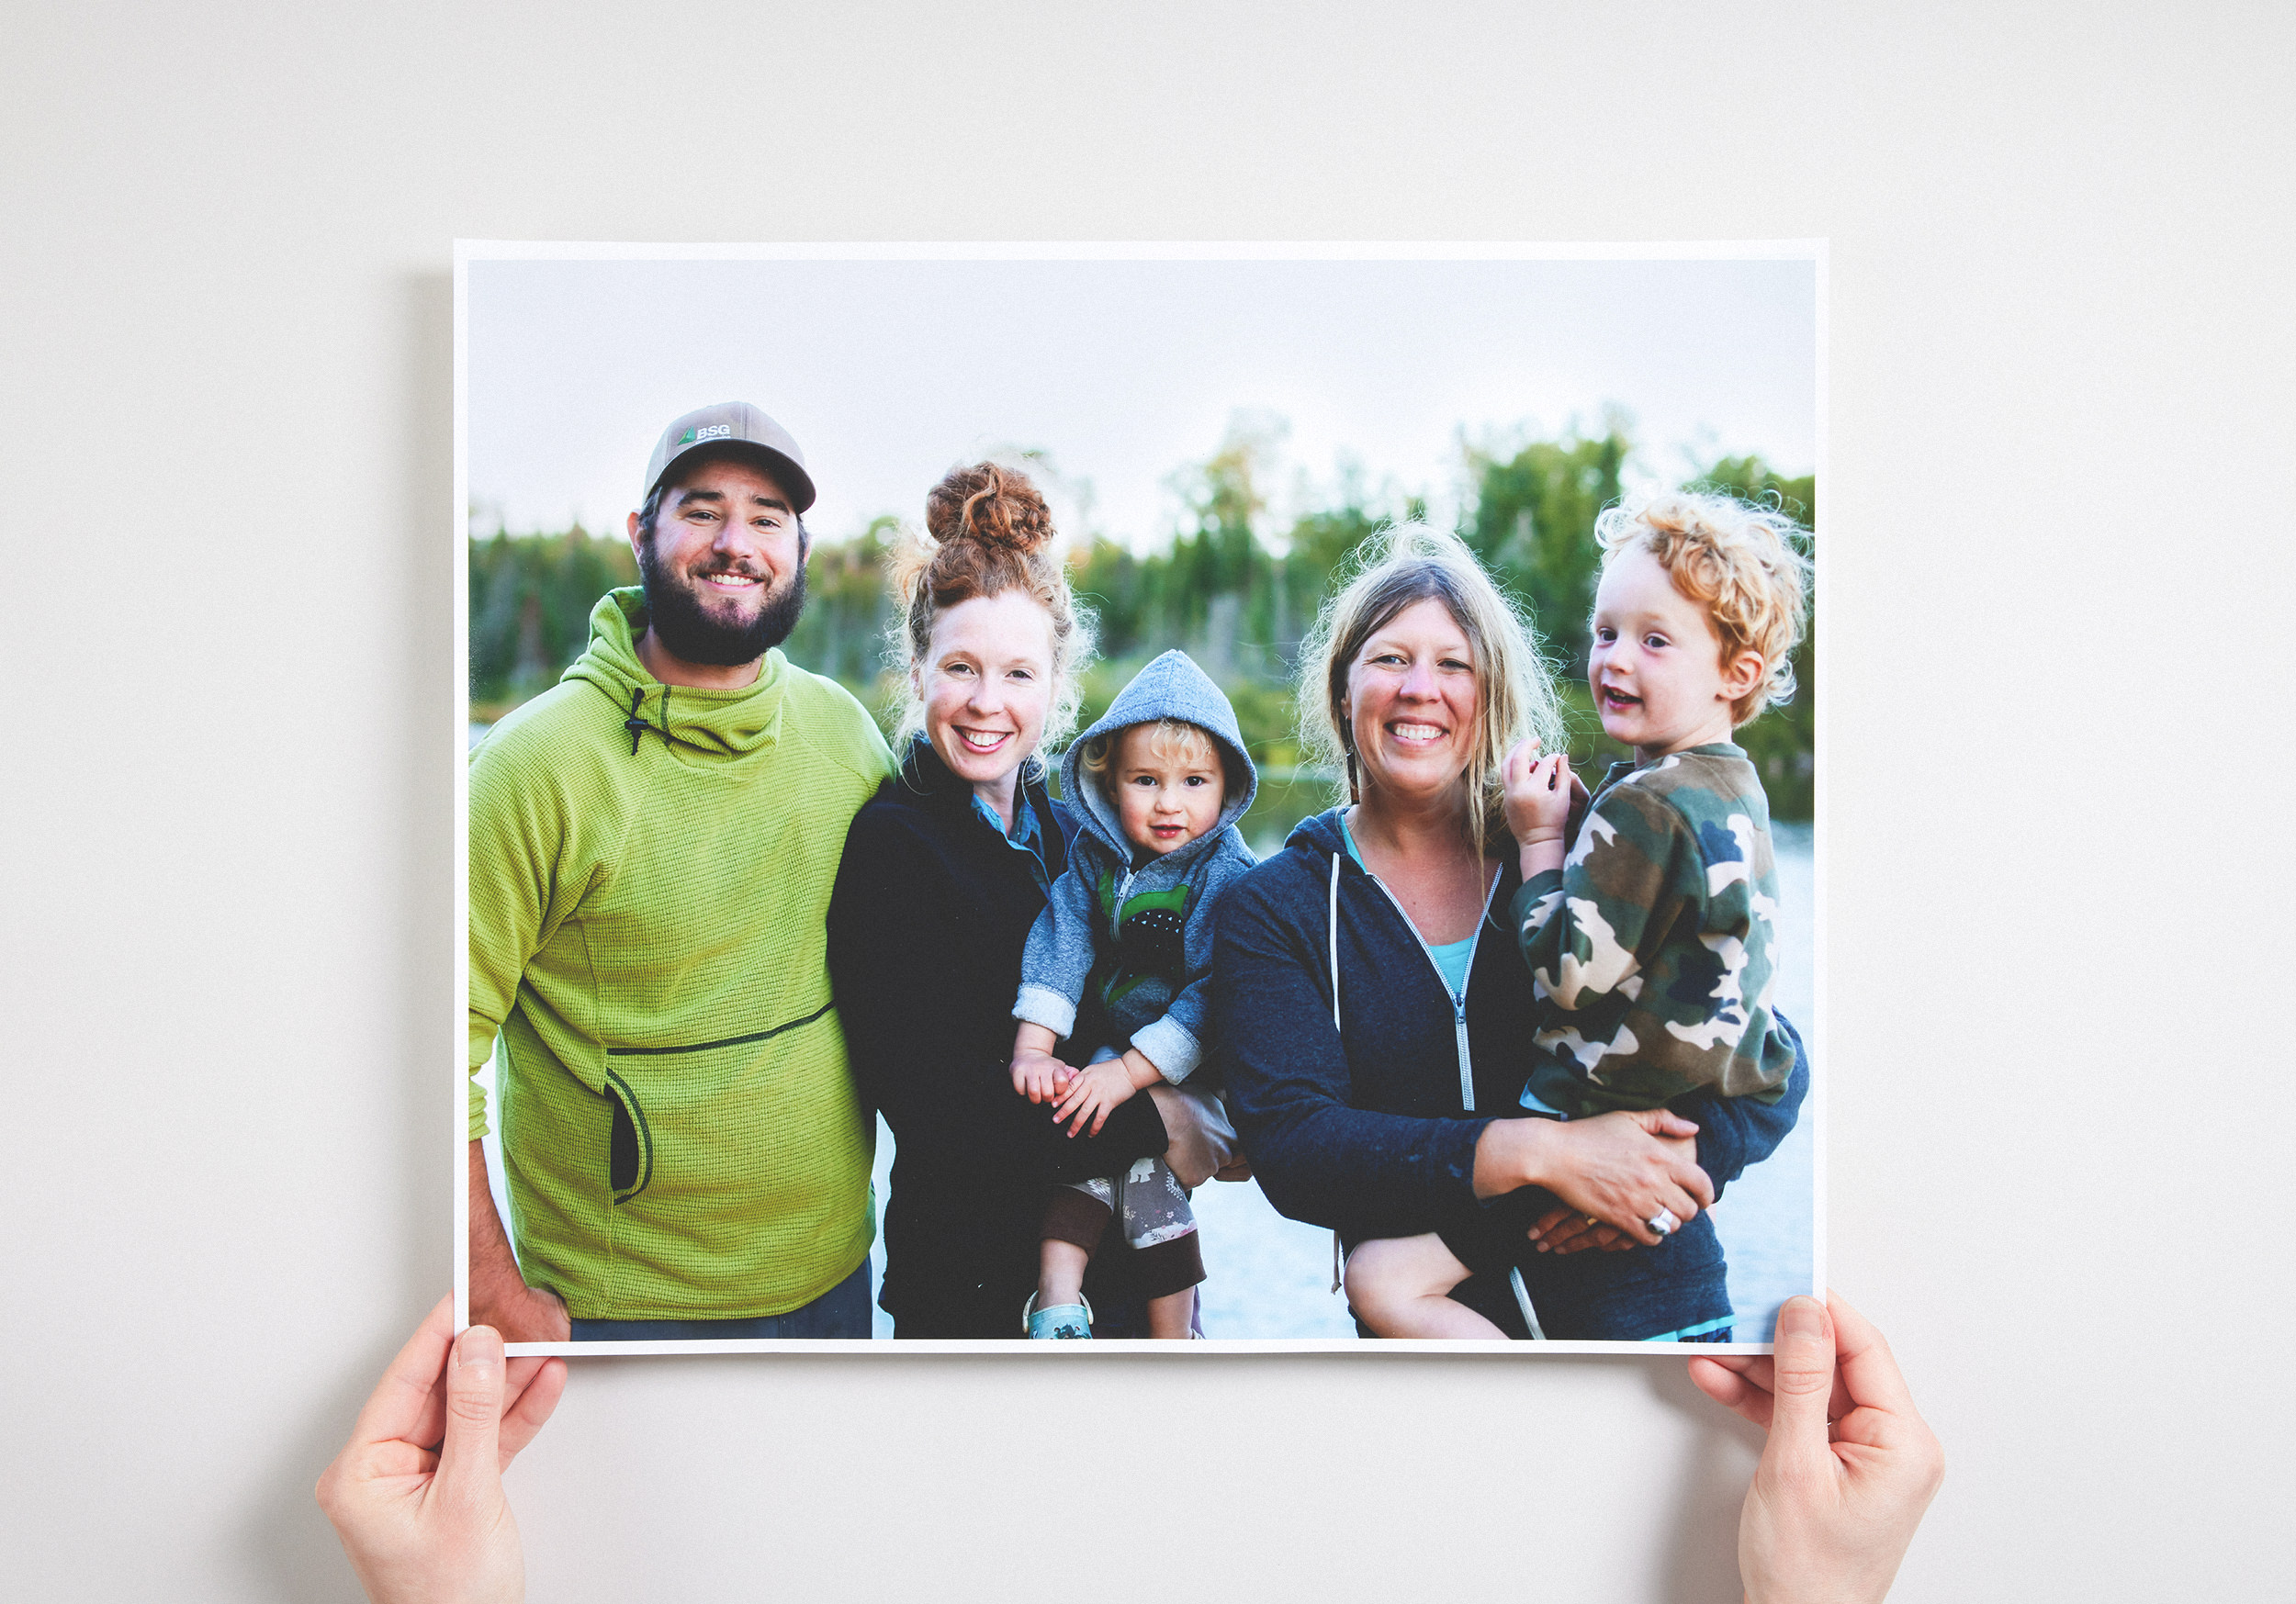 Custom Rolled Canvas Prints - Bordered or Cut to Size